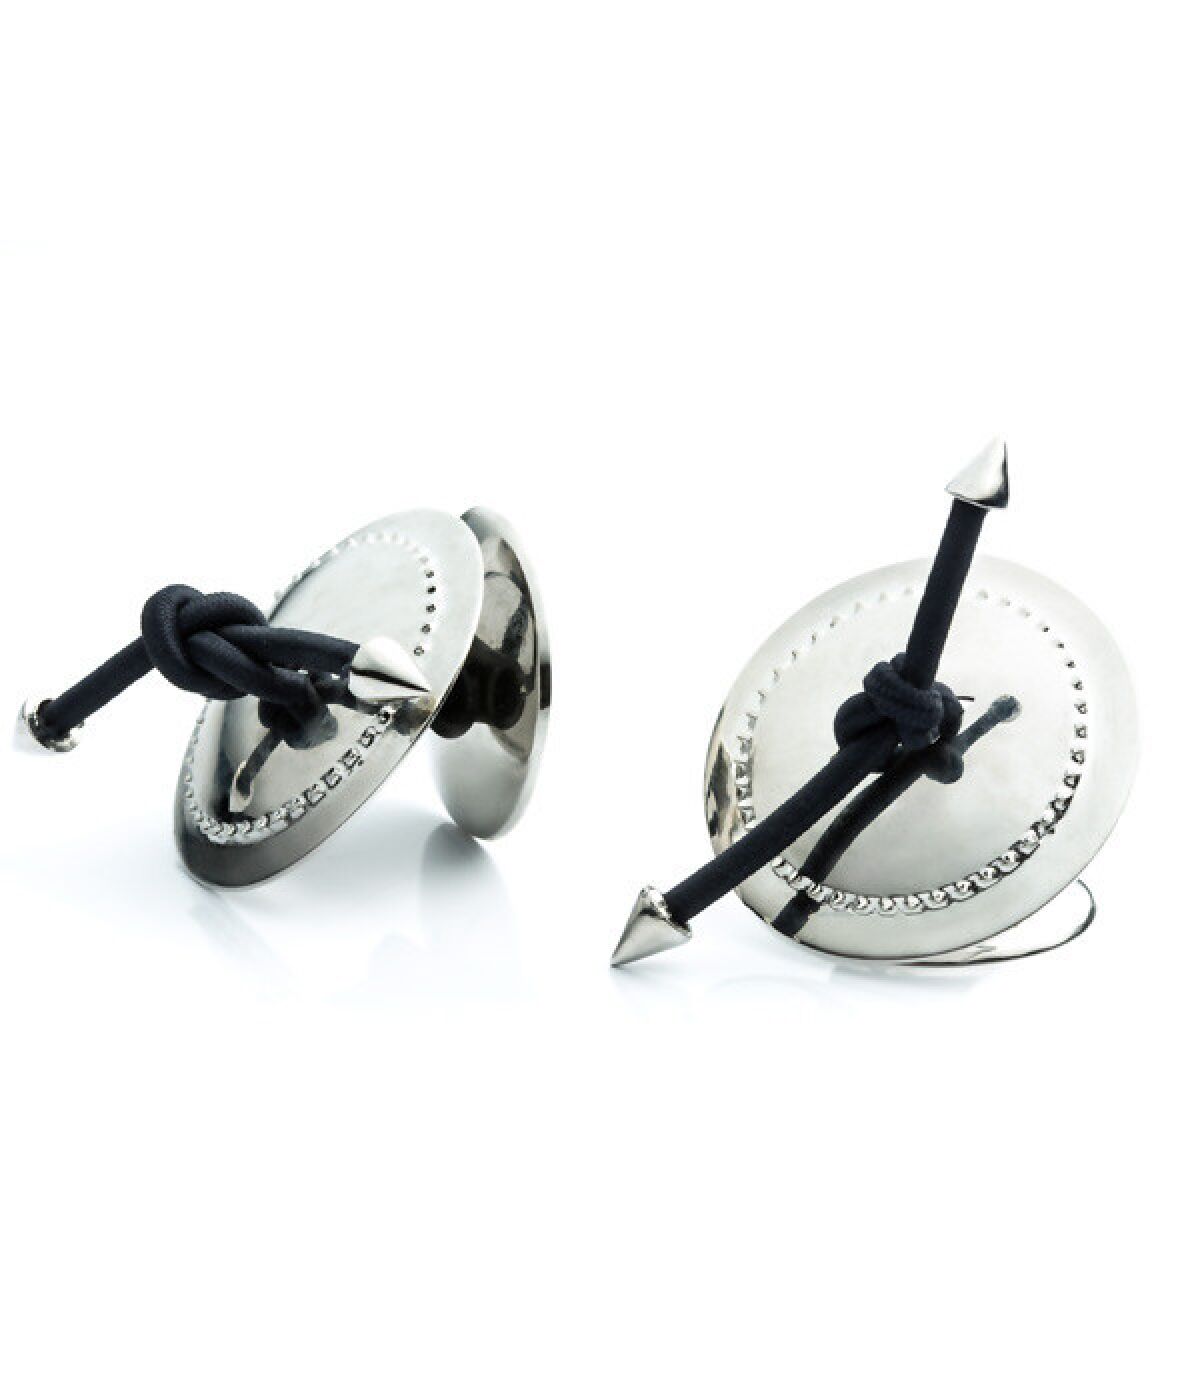 Eddie Borgo silver-plated, playable castanets.